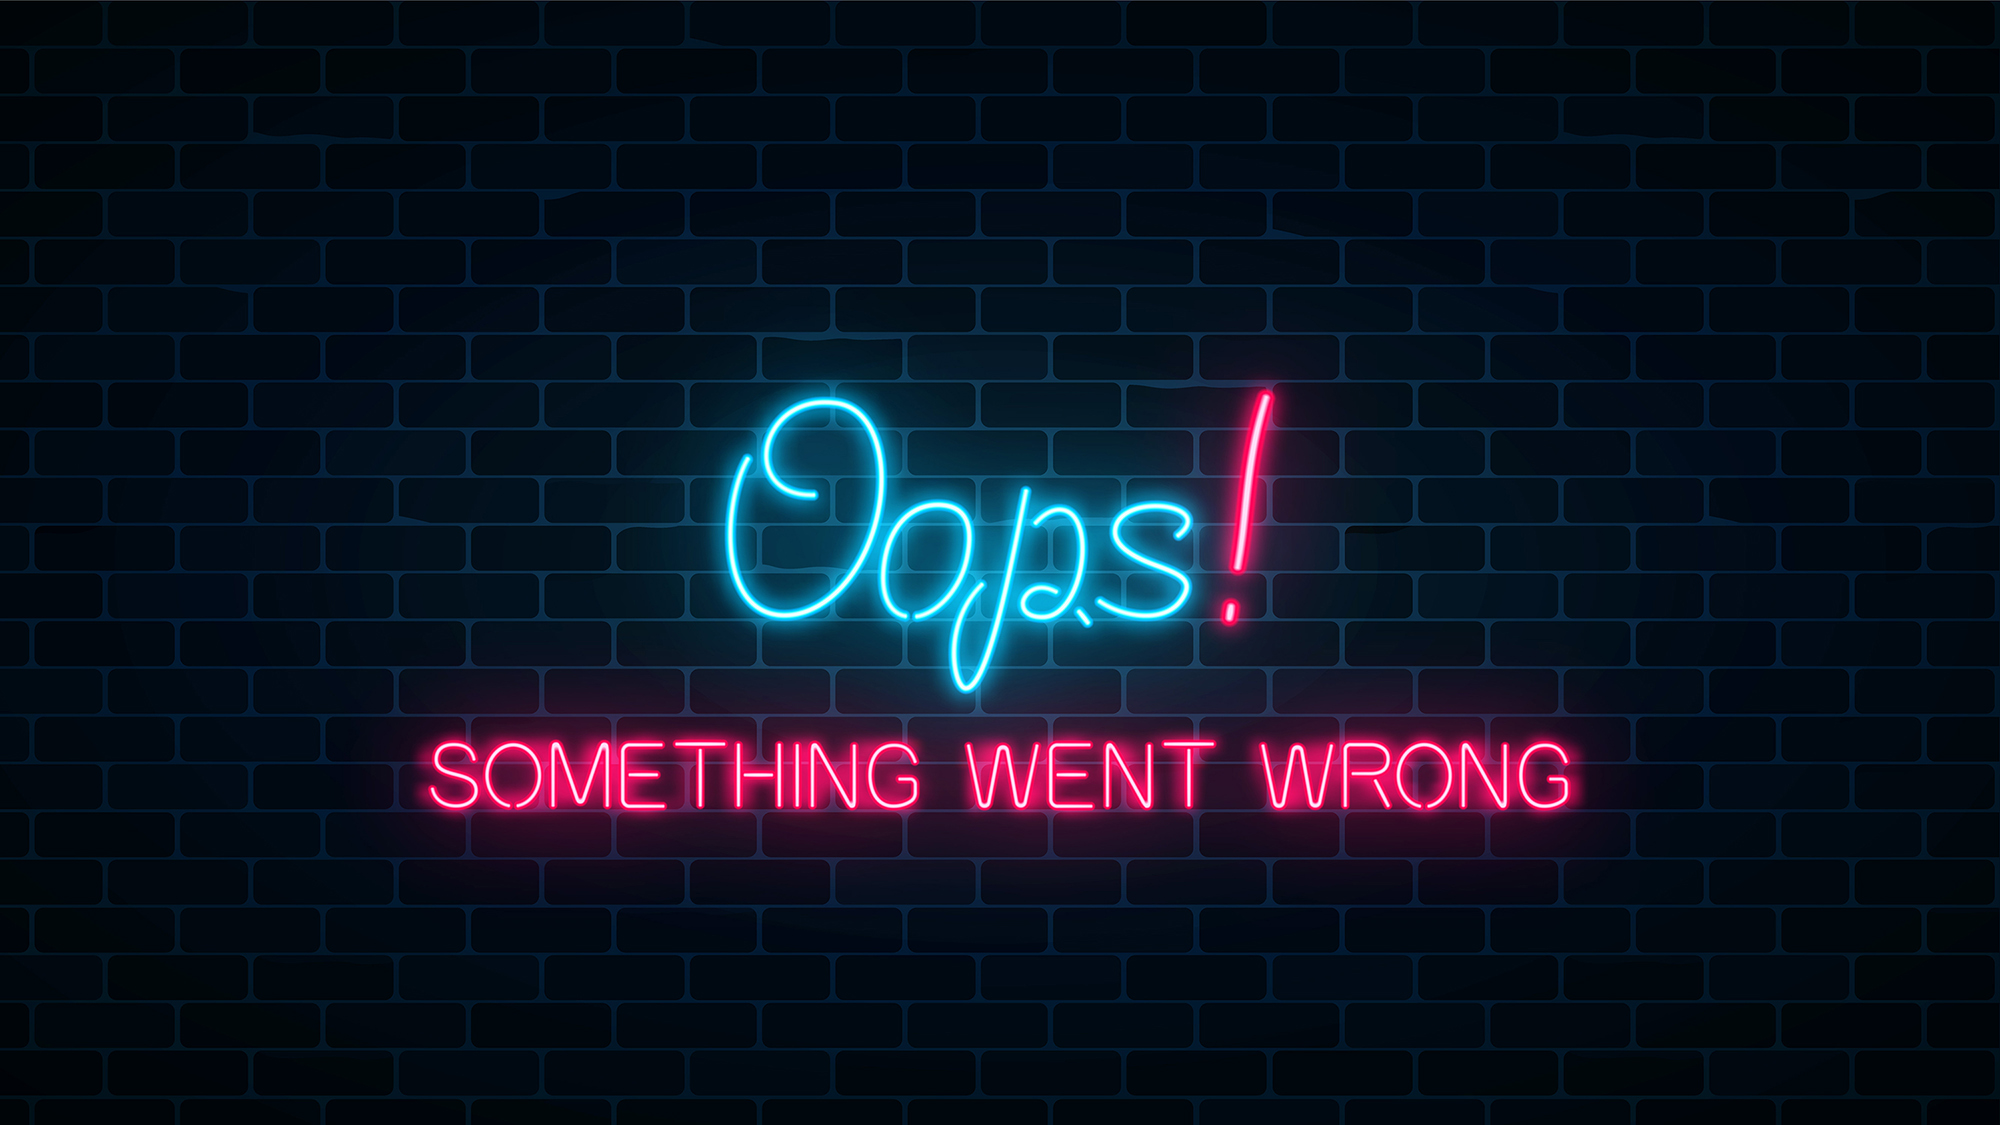 Oops! Something went wrong 404 error neon message on wall